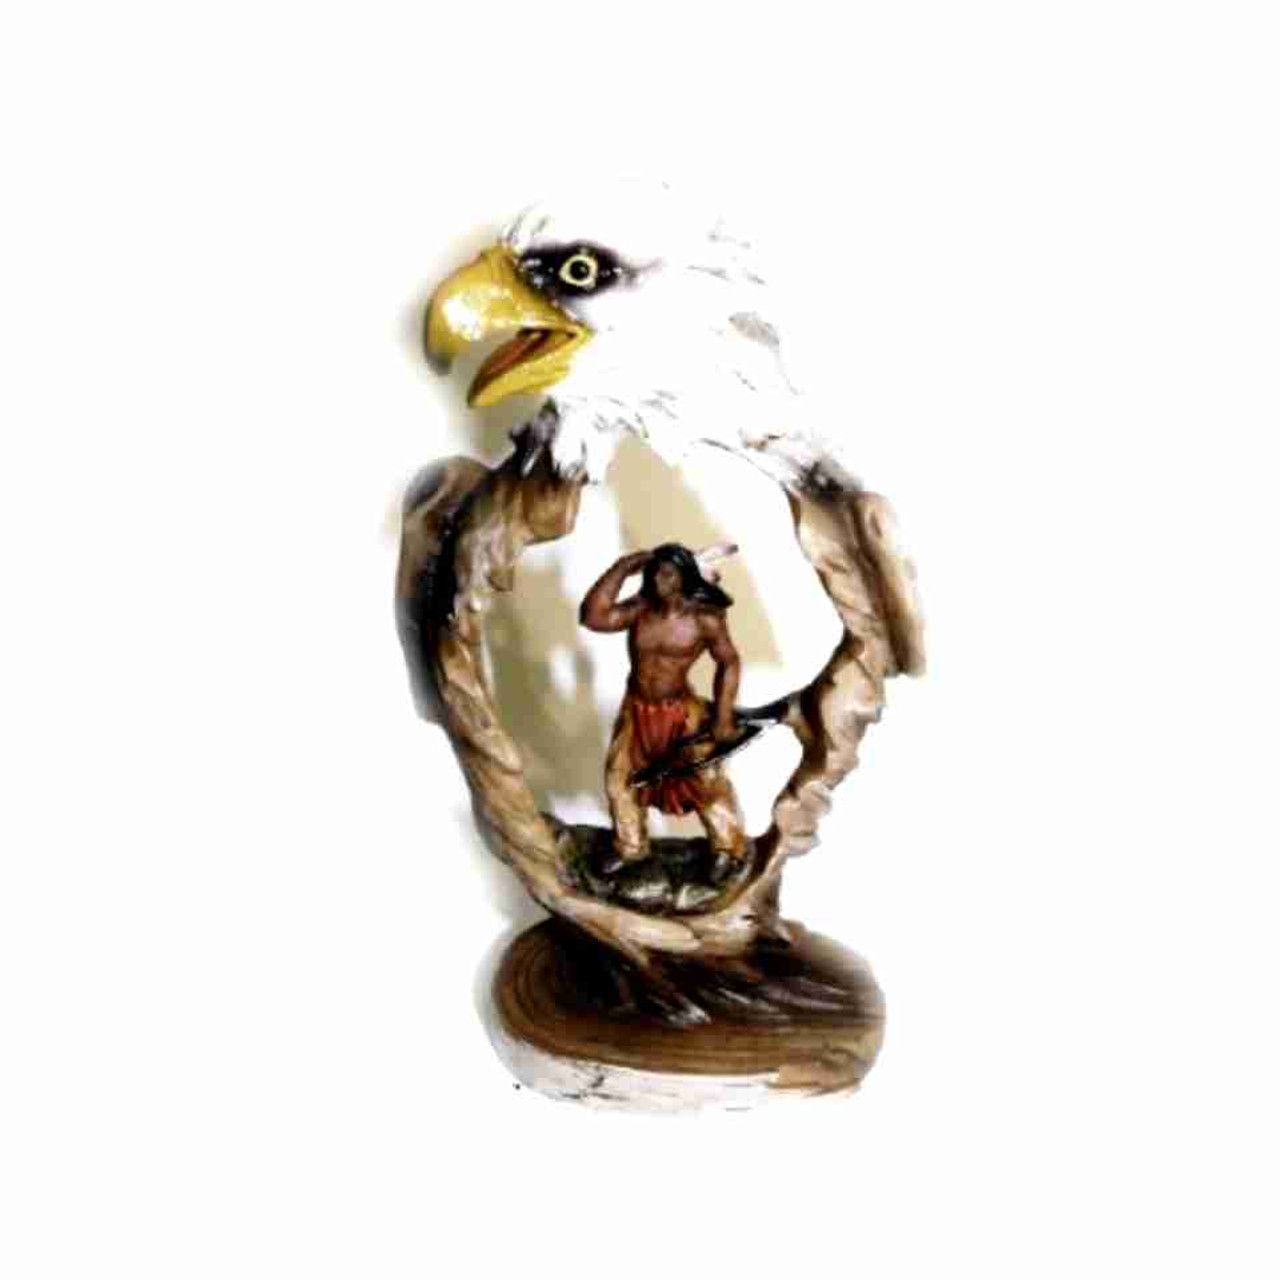 Native American Indian and Bald Eagle Mini Sculpture 7.5" Tall